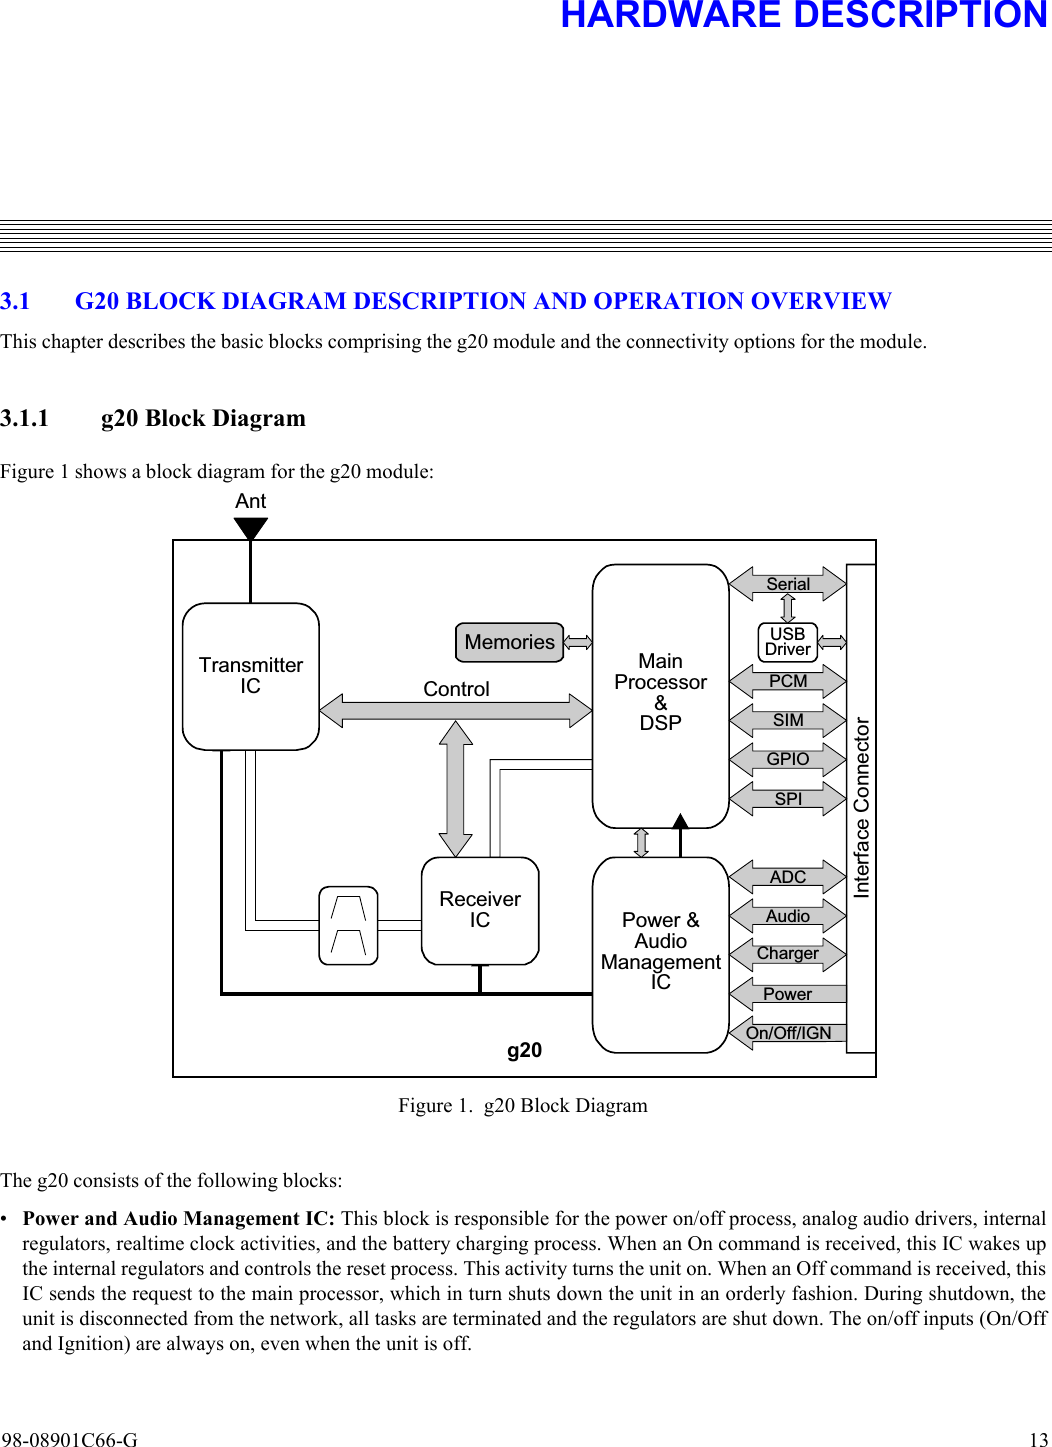 98-08901C66-G  133. HARDWARE DESCRIPTION3.1 G20 BLOCK DIAGRAM DESCRIPTION AND OPERATION OVERVIEWThis chapter describes the basic blocks comprising the g20 module and the connectivity options for the module.3.1.1 g20 Block DiagramFigure 1 shows a block diagram for the g20 module:Figure 1. g20 Block DiagramThe g20 consists of the following blocks:•Power and Audio Management IC: This block is responsible for the power on/off process, analog audio drivers, internalregulators, realtime clock activities, and the battery charging process. When an On command is received, this IC wakes upthe internal regulators and controls the reset process. This activity turns the unit on. When an Off command is received, thisIC sends the request to the main processor, which in turn shuts down the unit in an orderly fashion. During shutdown, theunit is disconnected from the network, all tasks are terminated and the regulators are shut down. The on/off inputs (On/Offand Ignition) are always on, even when the unit is off. MainProcessor&amp;DSPMemoriesPower &amp;AudioManagementICReceiverICControlUSBDriverPCMSIMGPIOInterface ConnectorSPIADCAudioChargerPowerOn/Off/IGNg20TransmitterICAntSerial